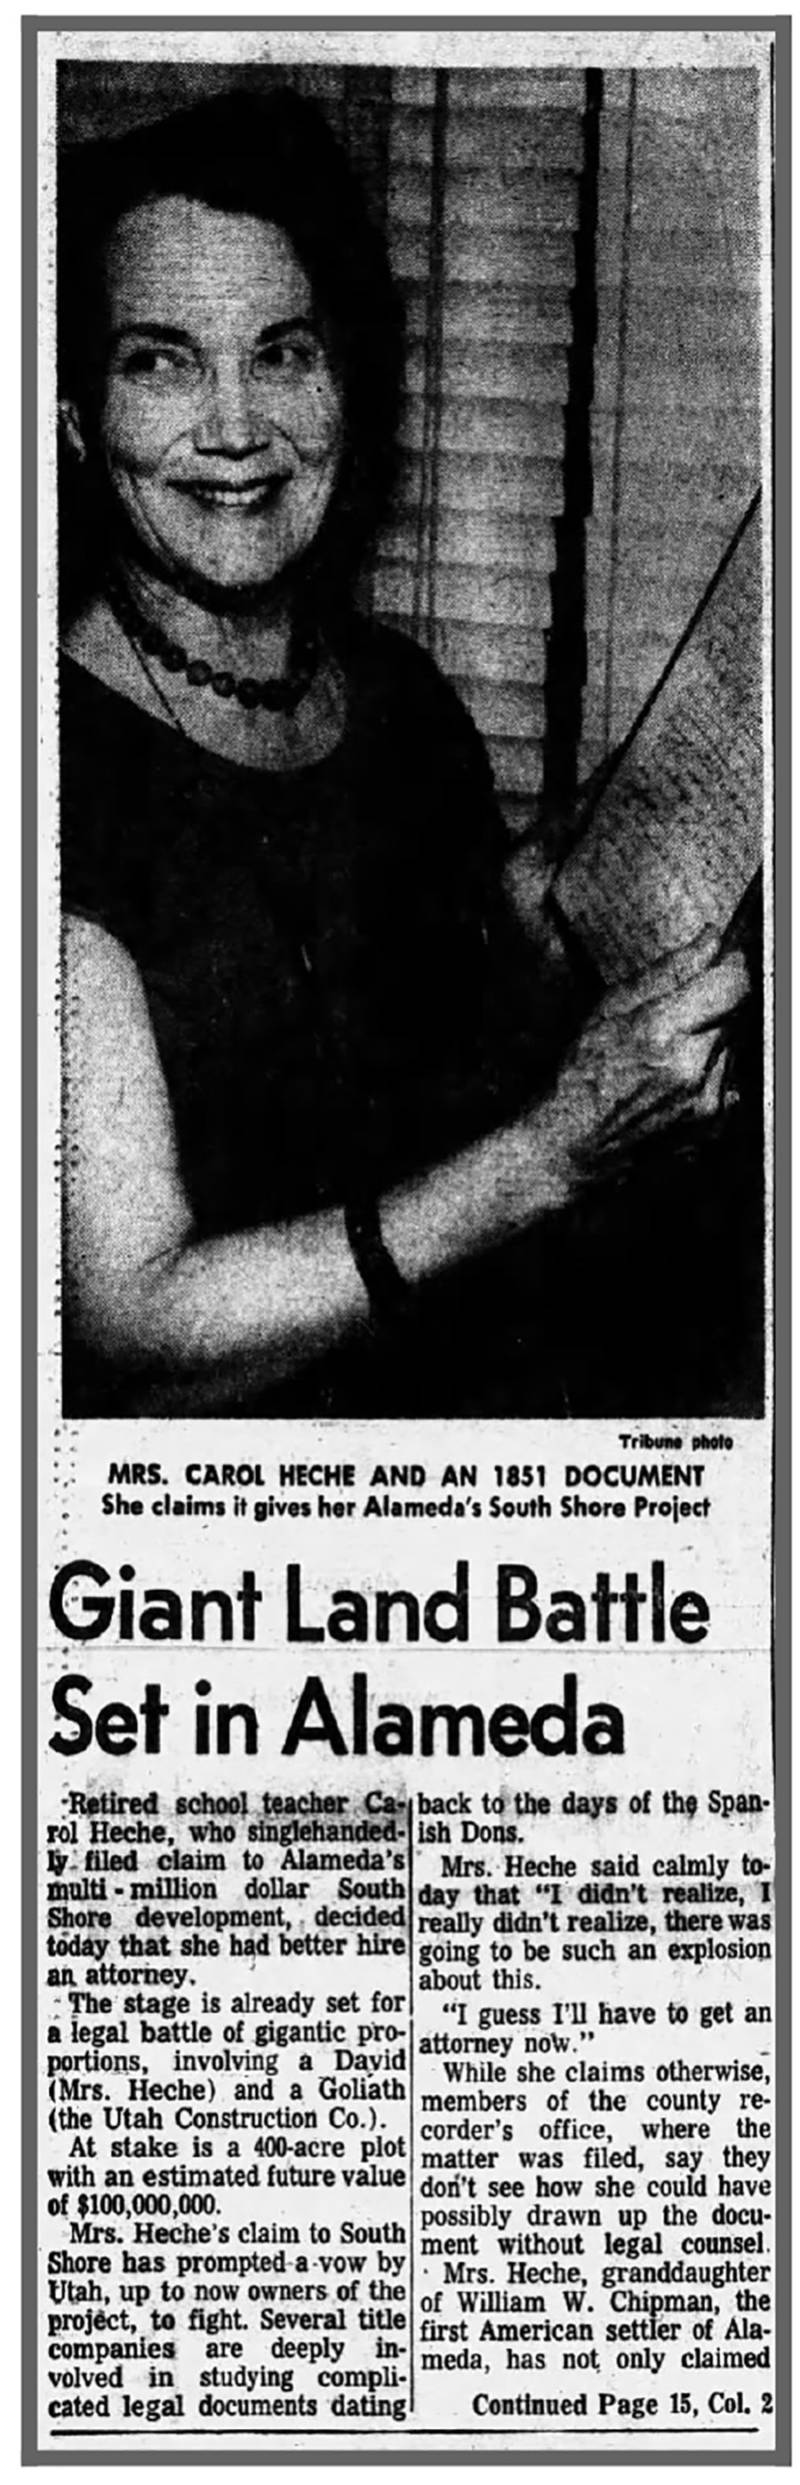 A newspaper clipping detailing one of Carol Heche's other legal battles borne out of her claim to submerged land off of Alameda Island.